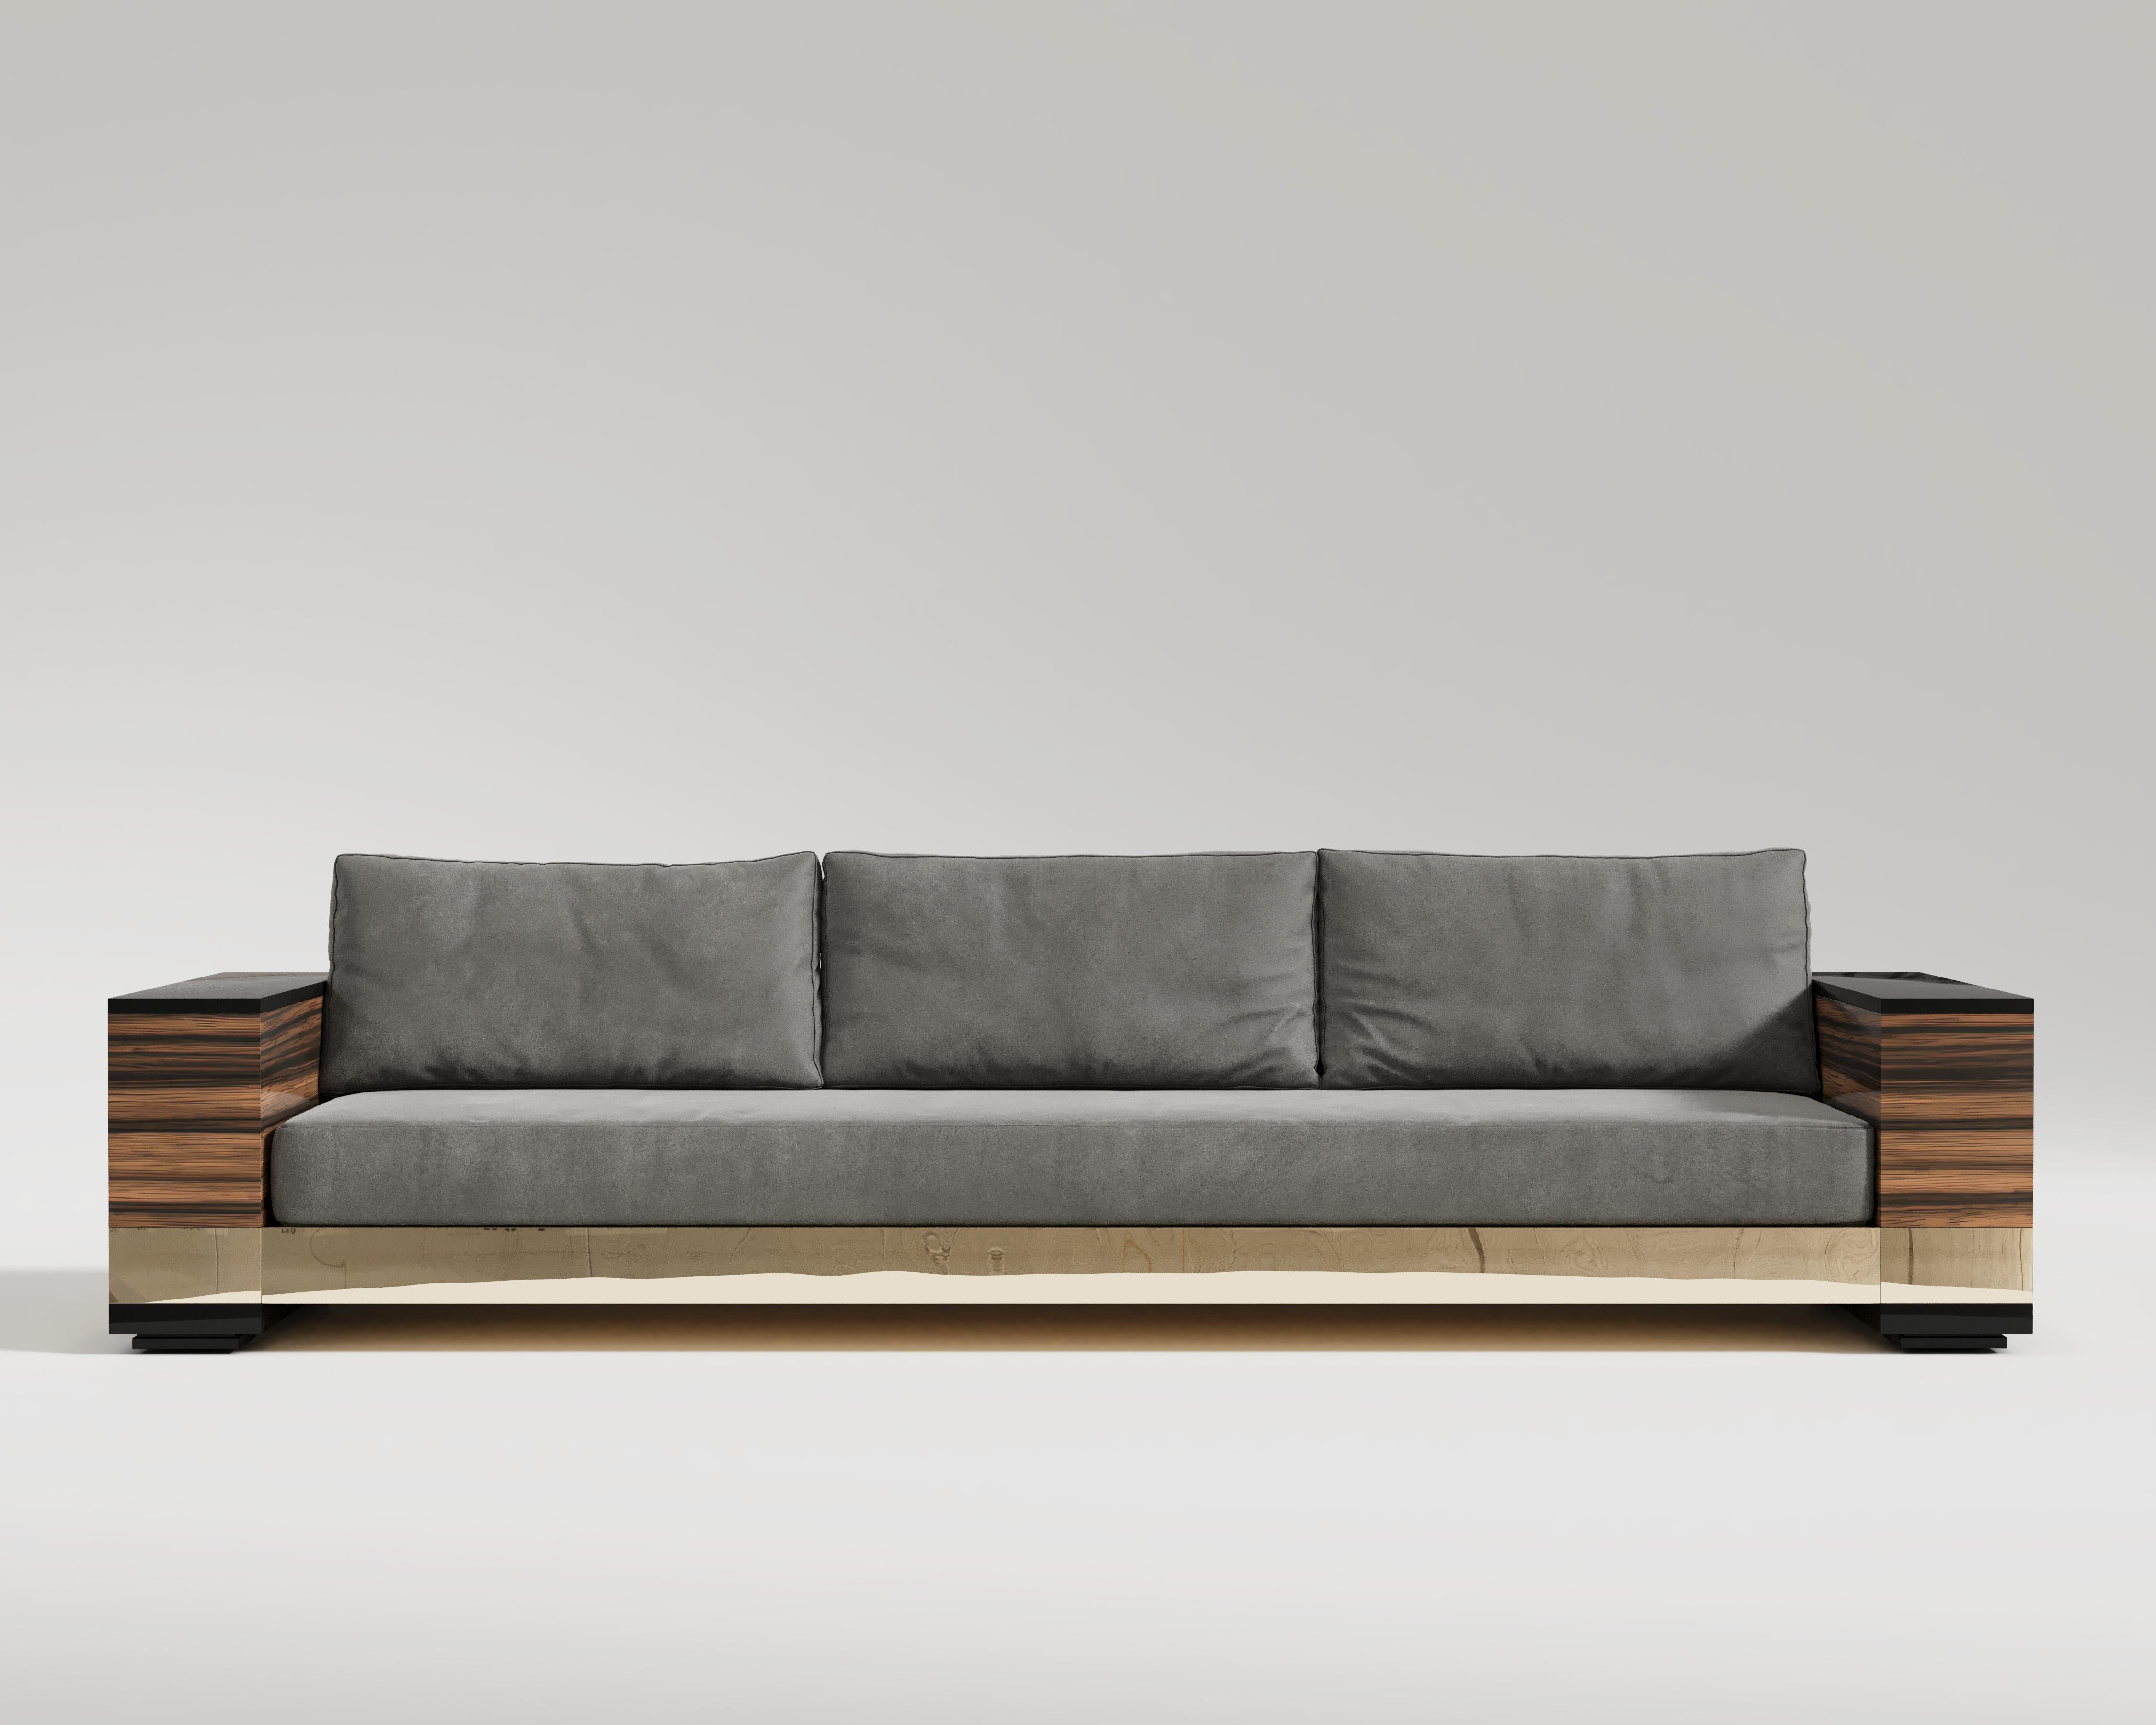 Giuseppe Sofa

Giuseppe Sofa, a sofa that gives you more than just a seat, a sofa that goes further to give you a masterful style statement. The ziricote frame material is generally known for its striking grain patterns. The bronze polished base